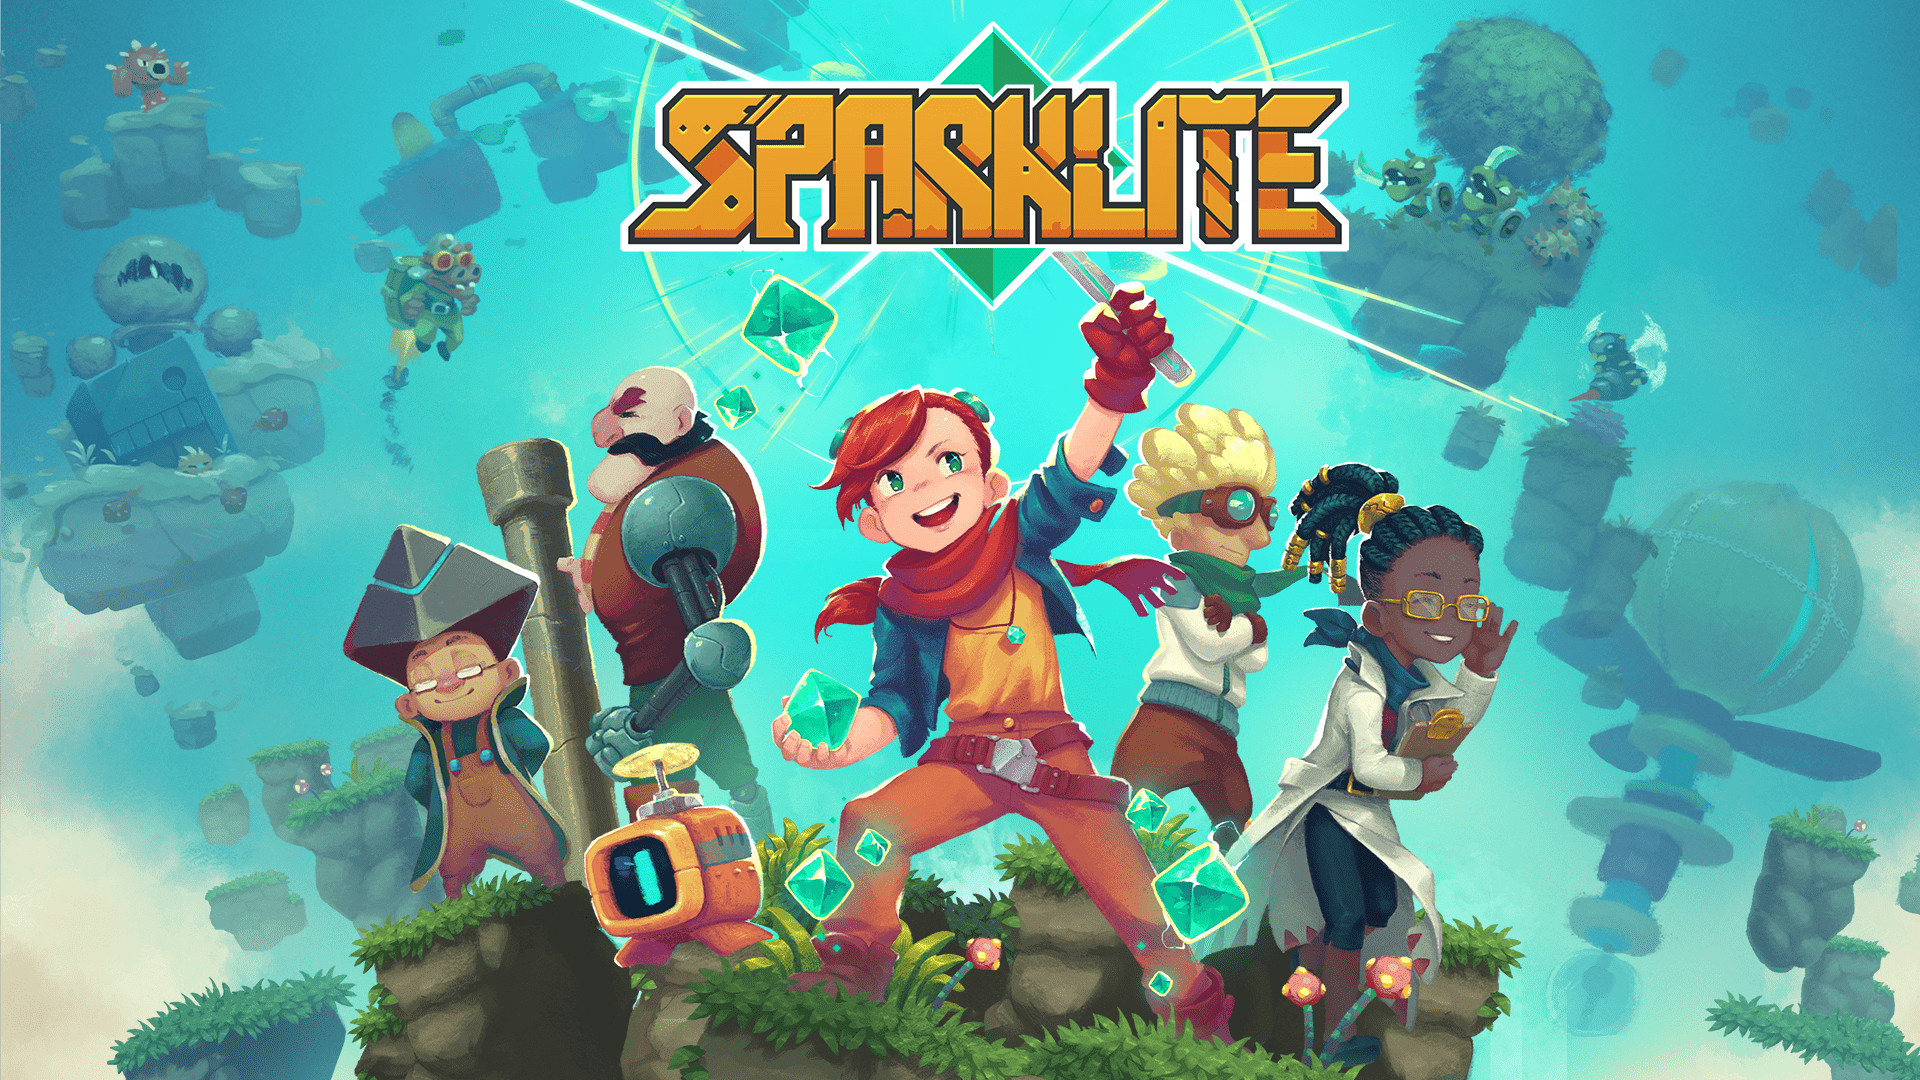 Sparklite Review – A bright spark, or a blown fuse?